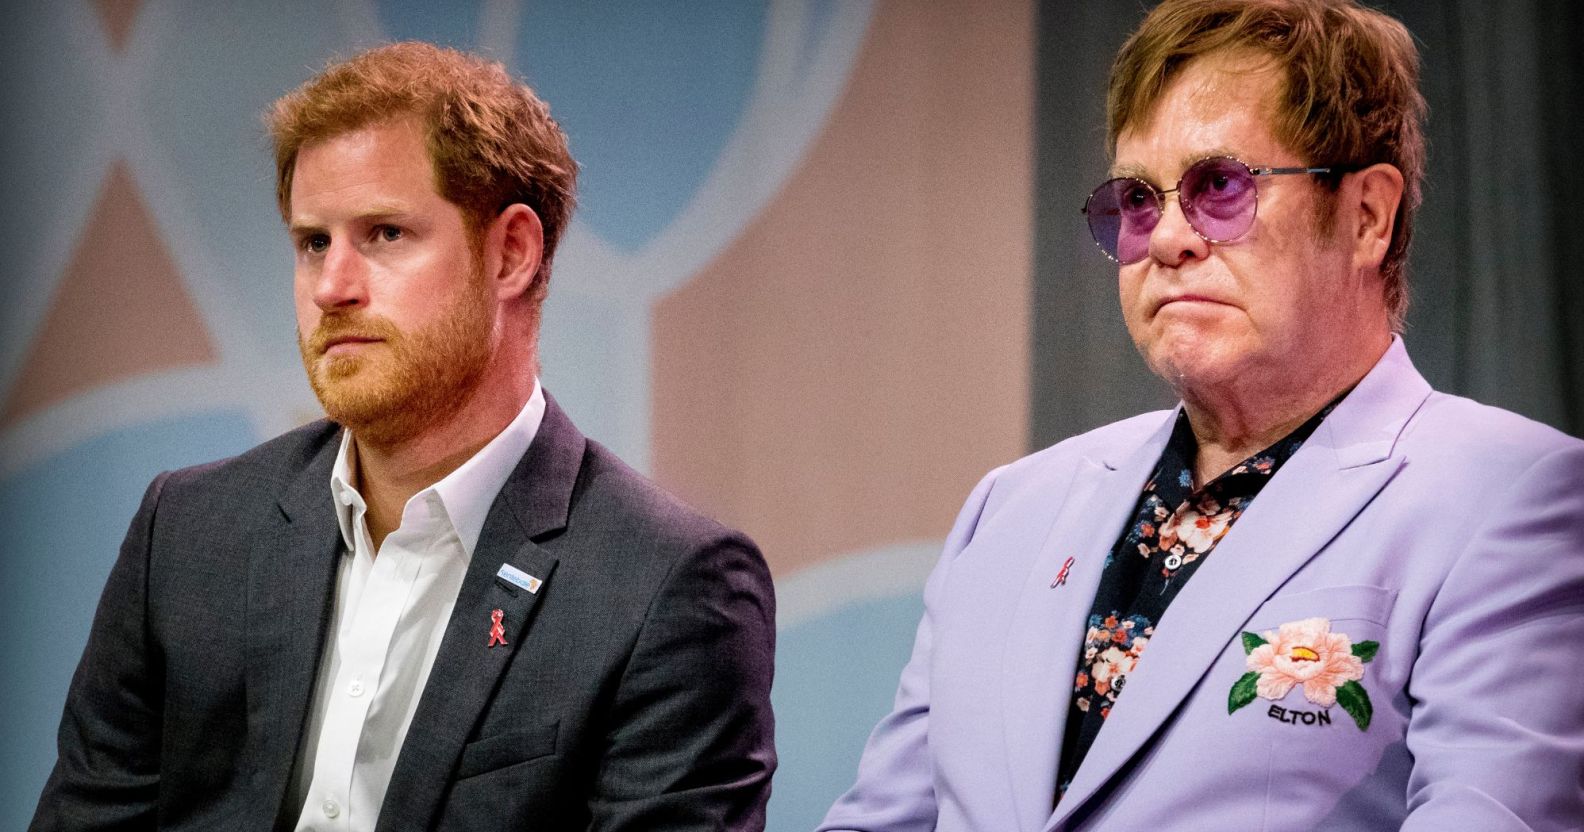 Prince Harry wears a white shirt and dark grey suit jacket as he sits next to Elton John, who is wearing a light purple jacket and dark shirt with floral patterning on it